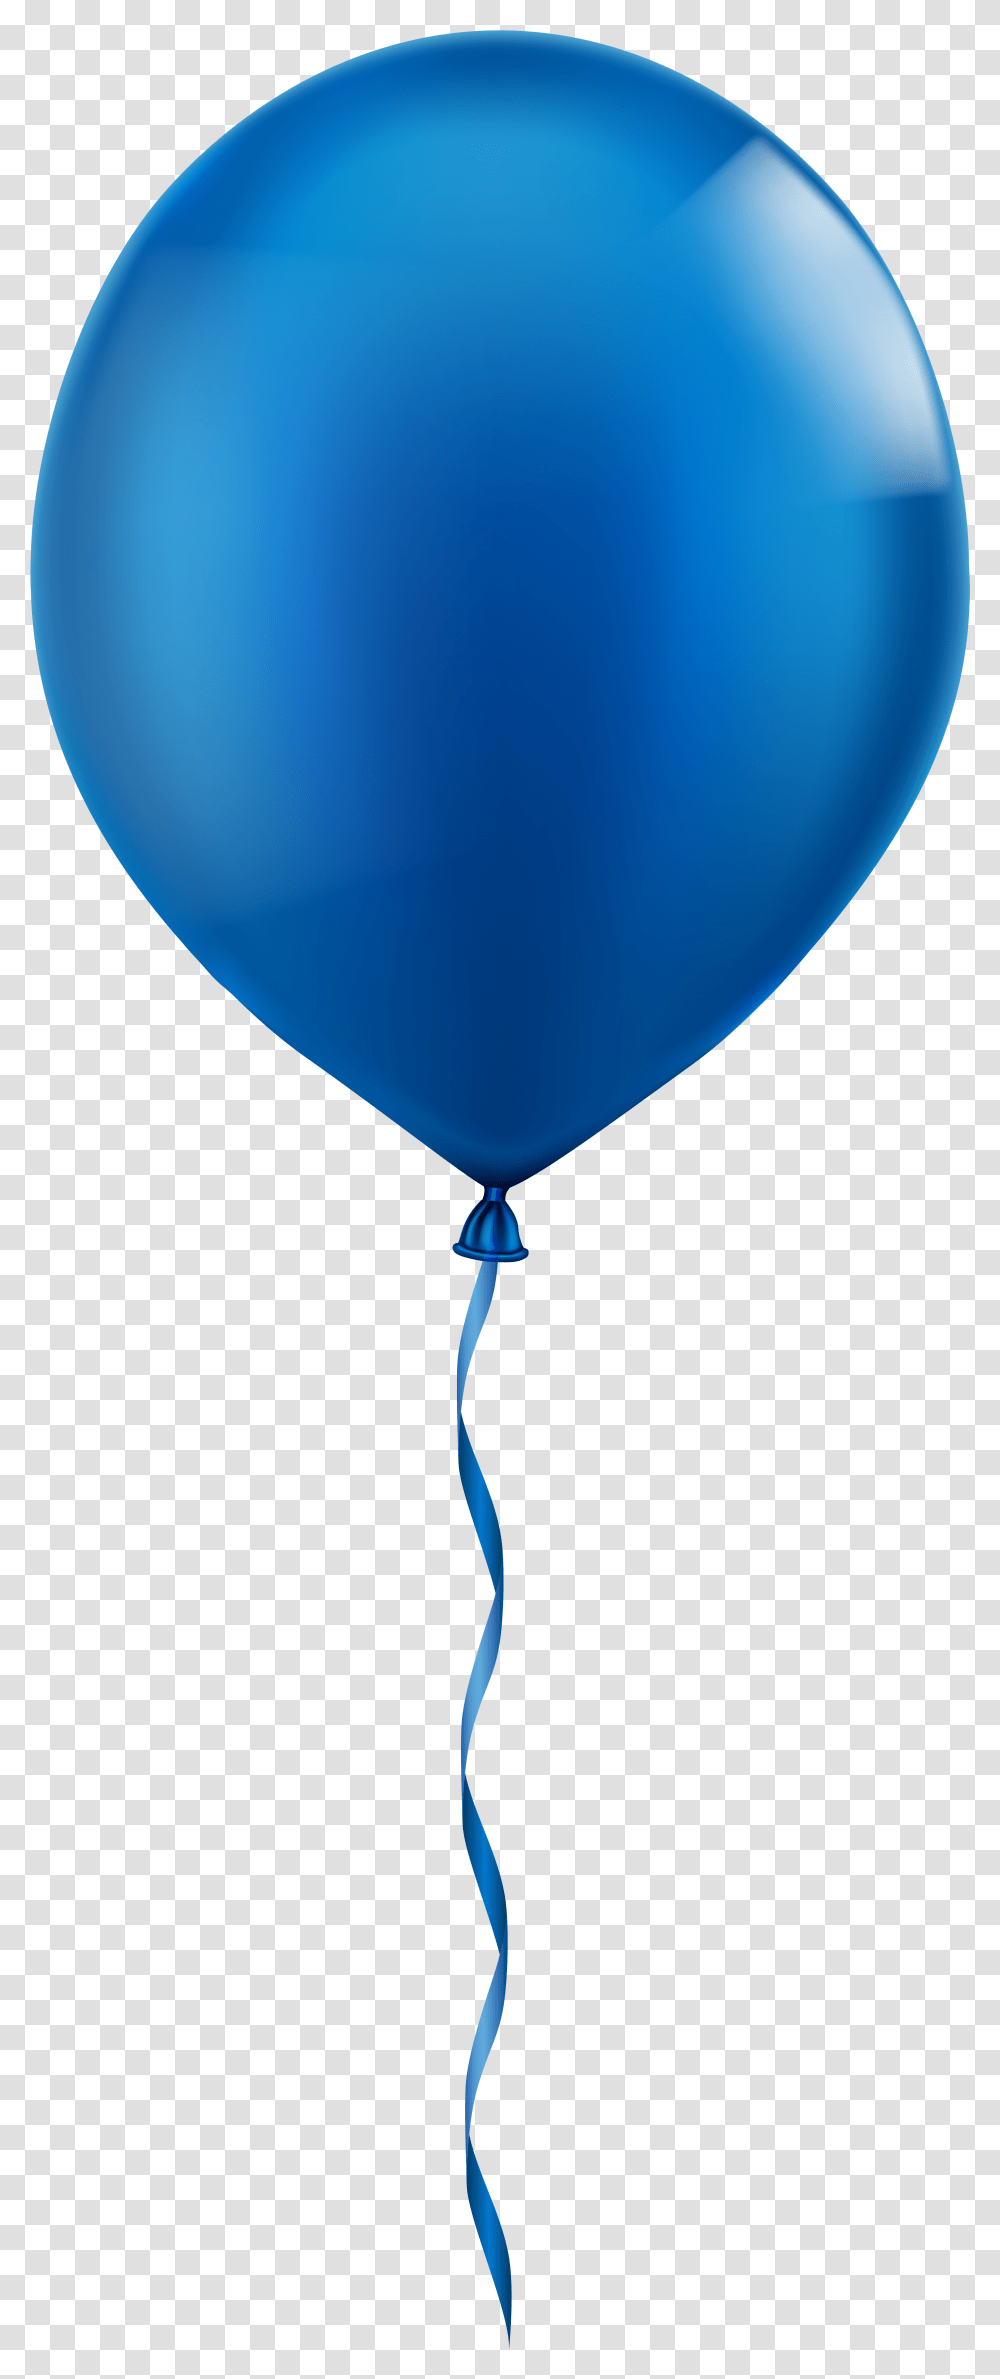 Blue Balloon Download Background Blue Balloon Transparent Png